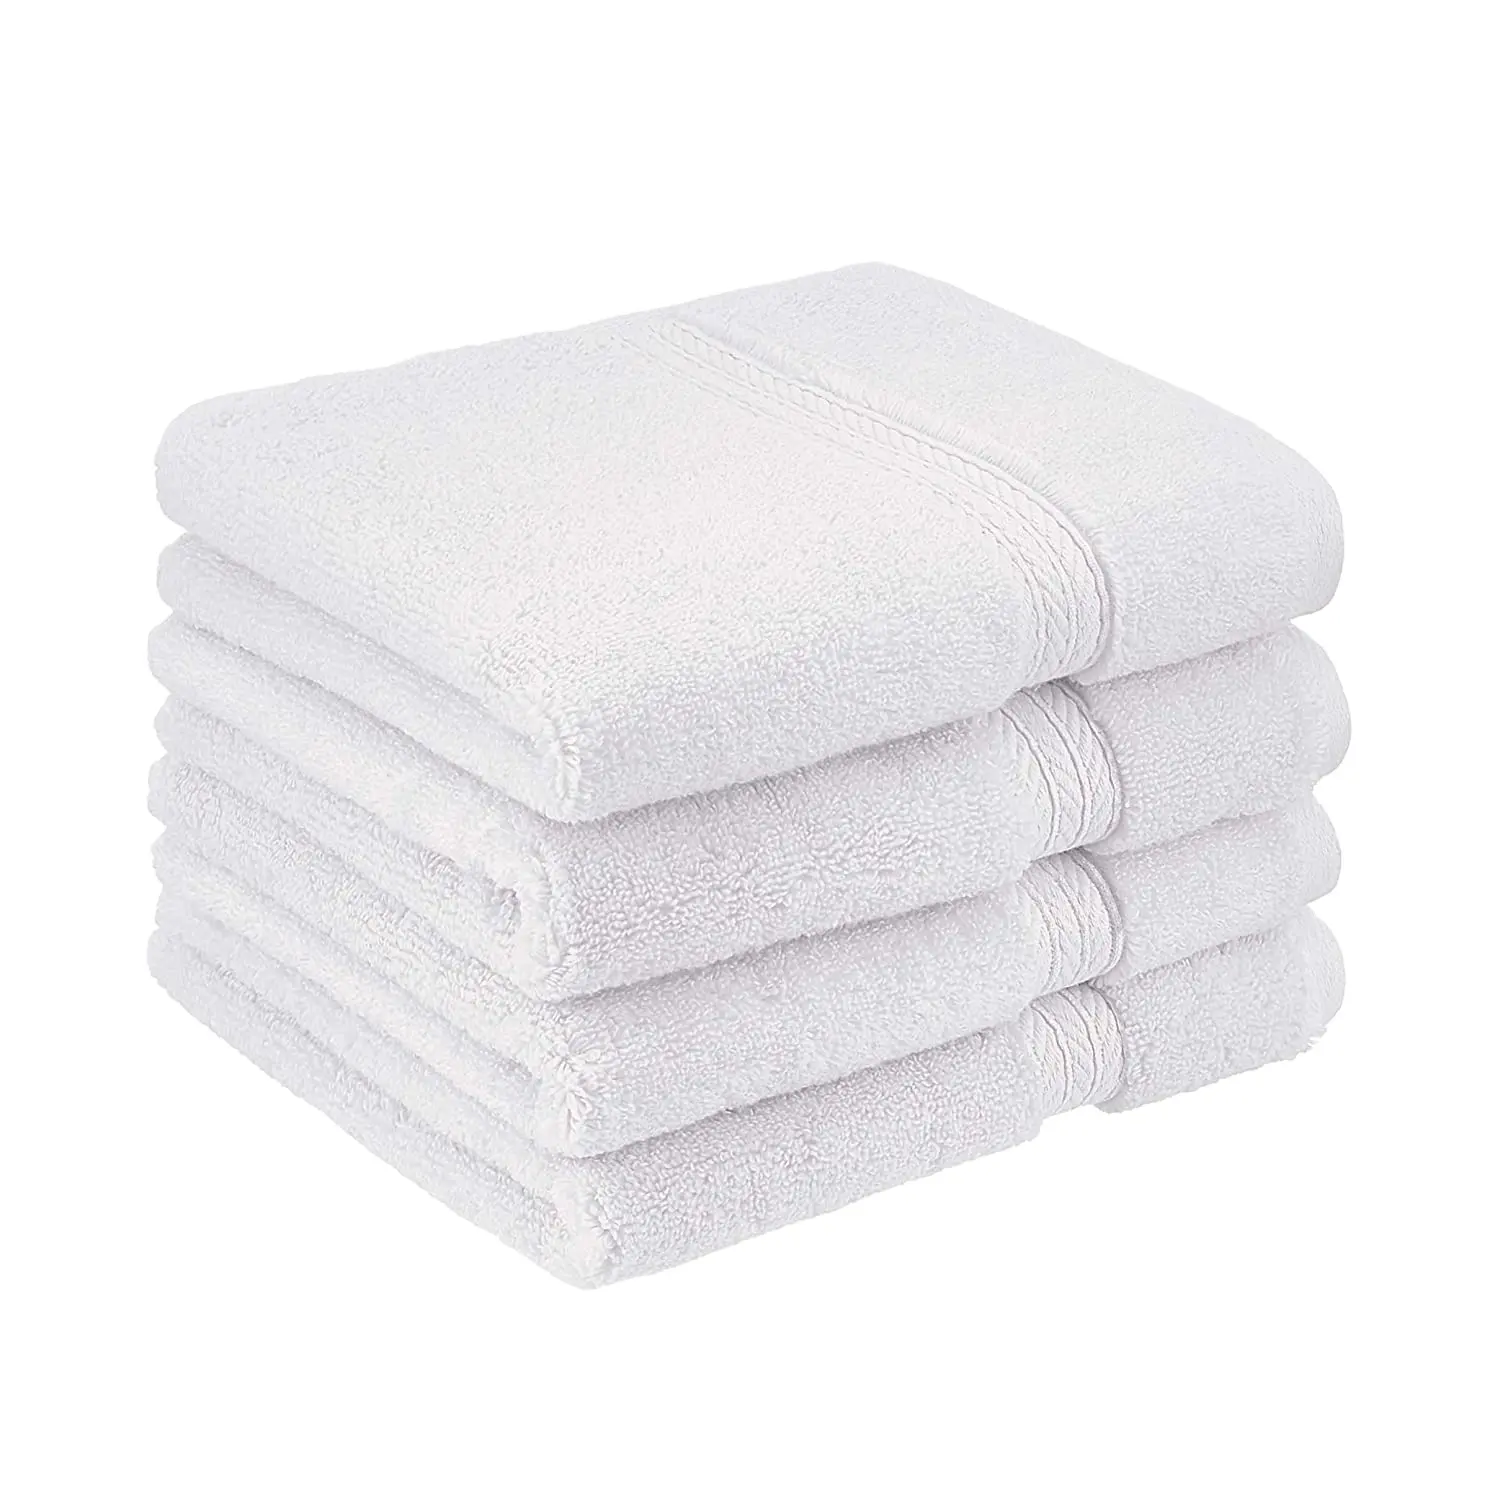 Wholesale 5 star hotel quality living face towels 100 cotton white hand towel customized high quality hand towels for hotels